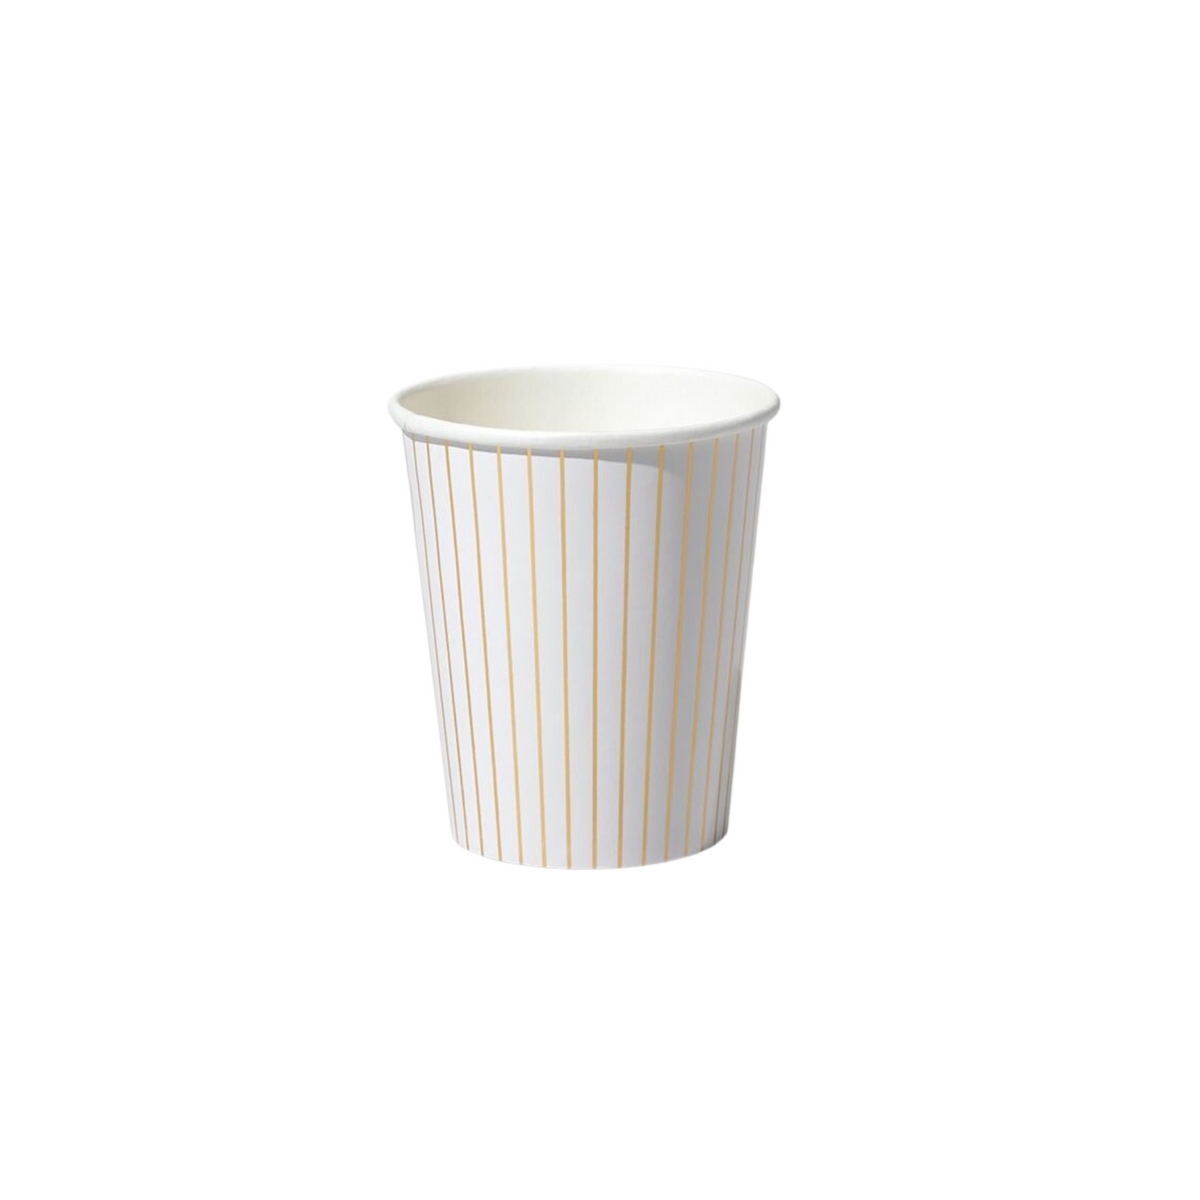 Creative Converting Rainbow Hot/Cold Paper Paper Cups 12 Oz., 8 ct